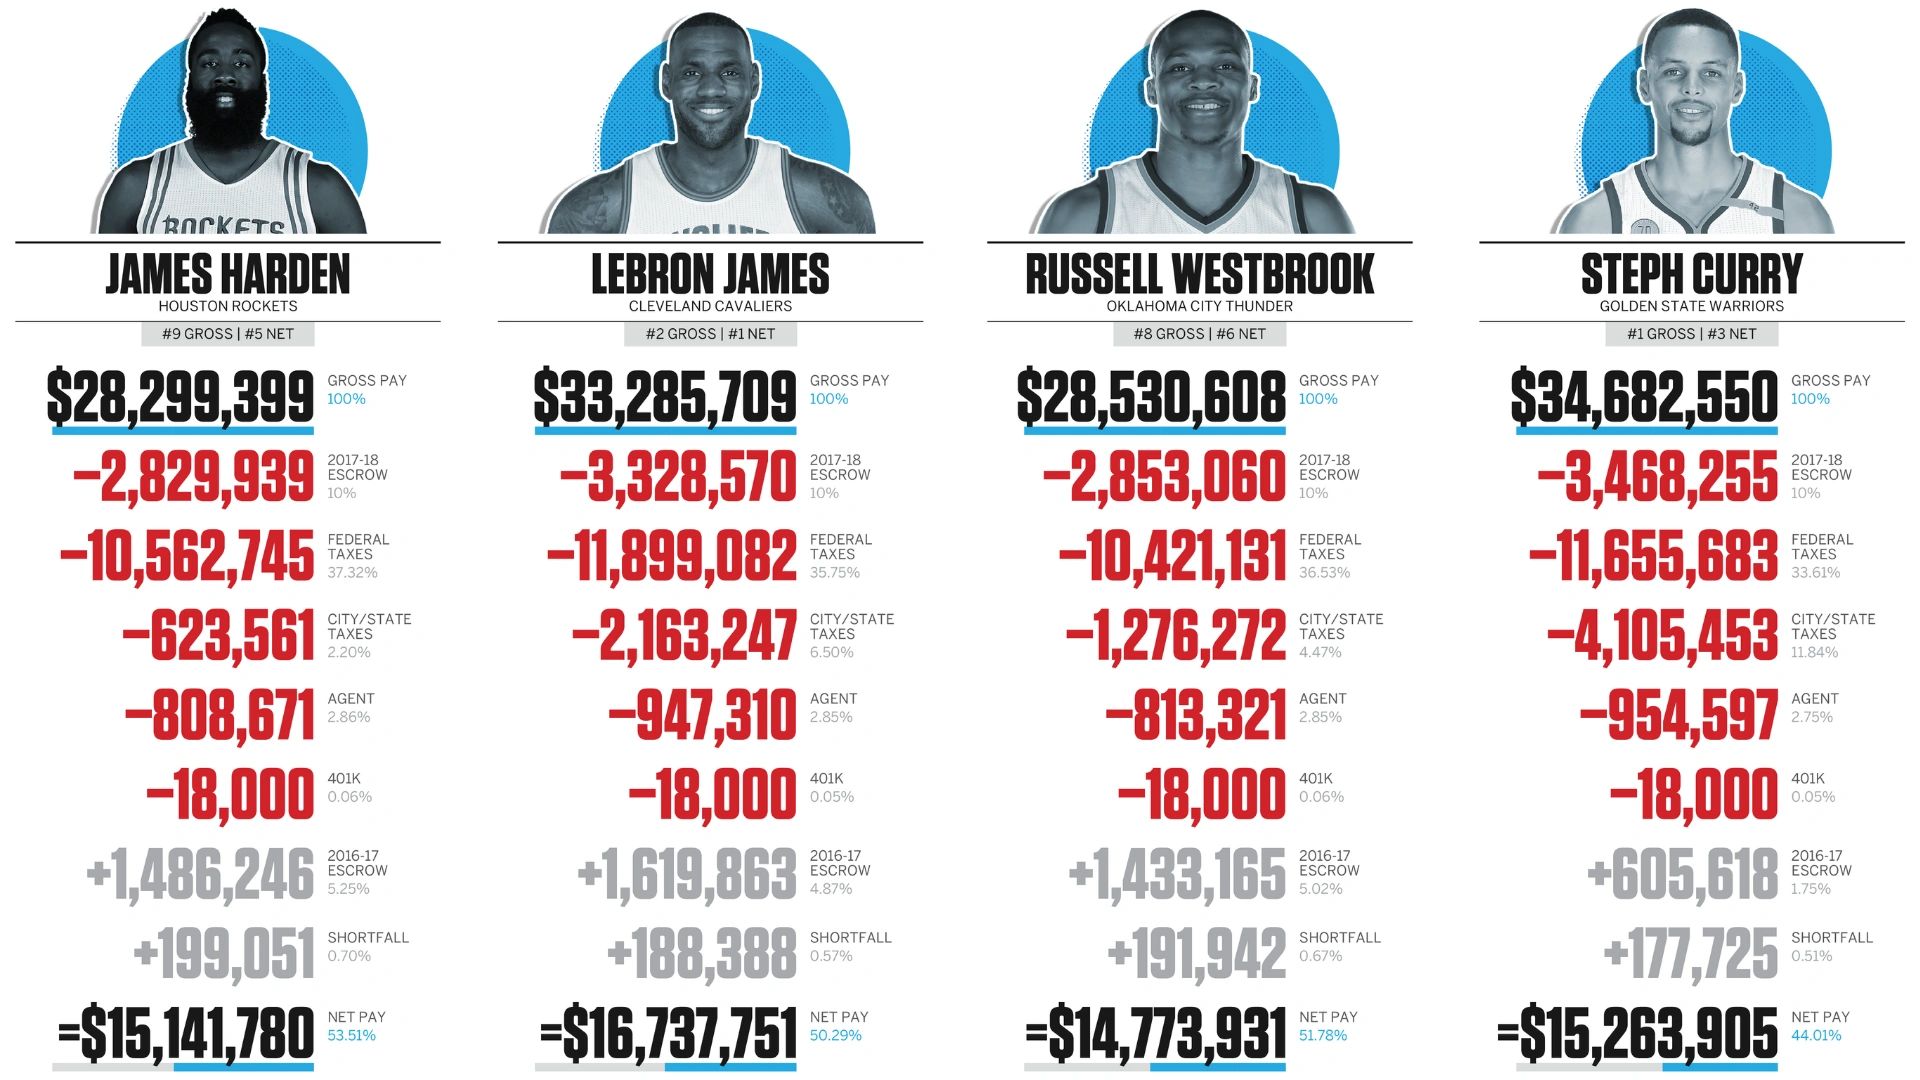 How Taxes Work For NBA Professional Athletes And Coaches